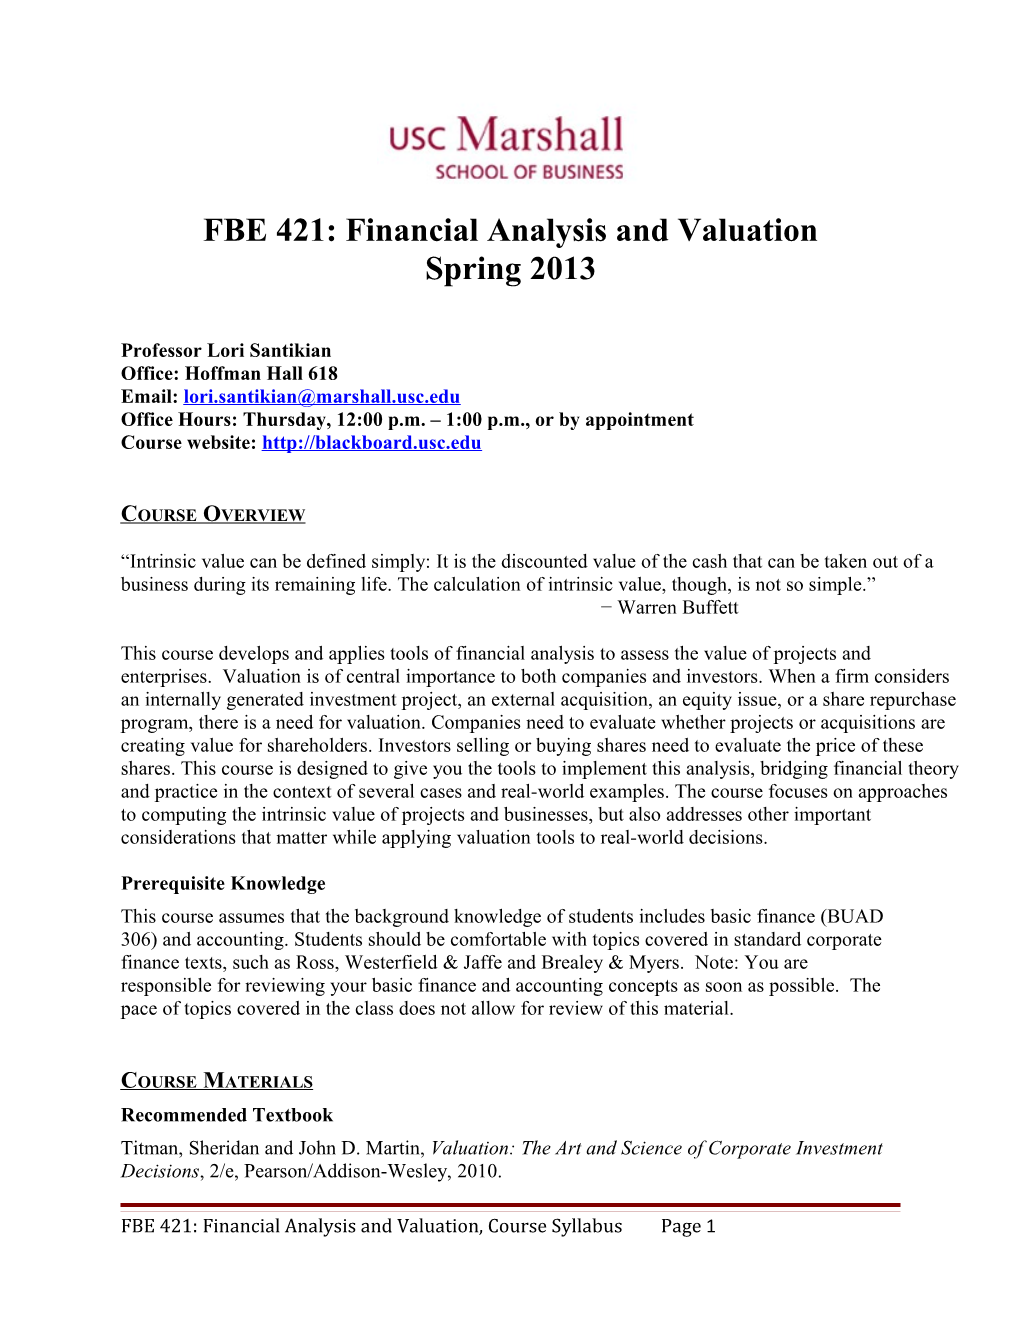 FBE 421: Financial Analysis and Valuation